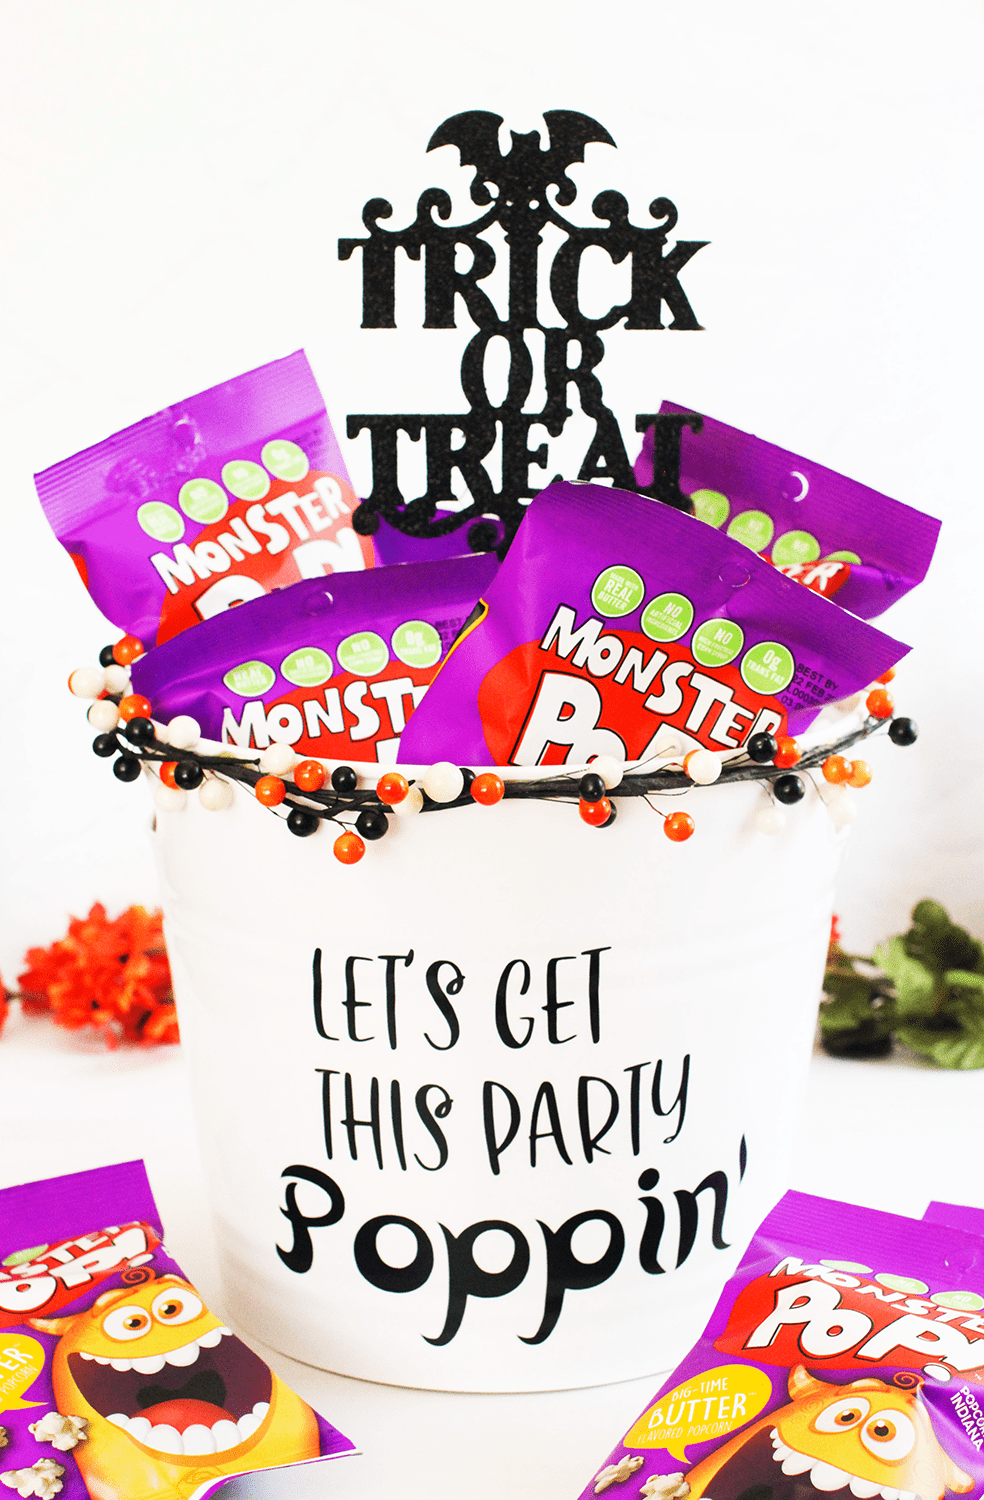 Halloween Party Bucket Filled With Monster Pop popcorn - For Monster Themed Parties and Halloween Parties. DIY...Find out more at © DearCreatives.com